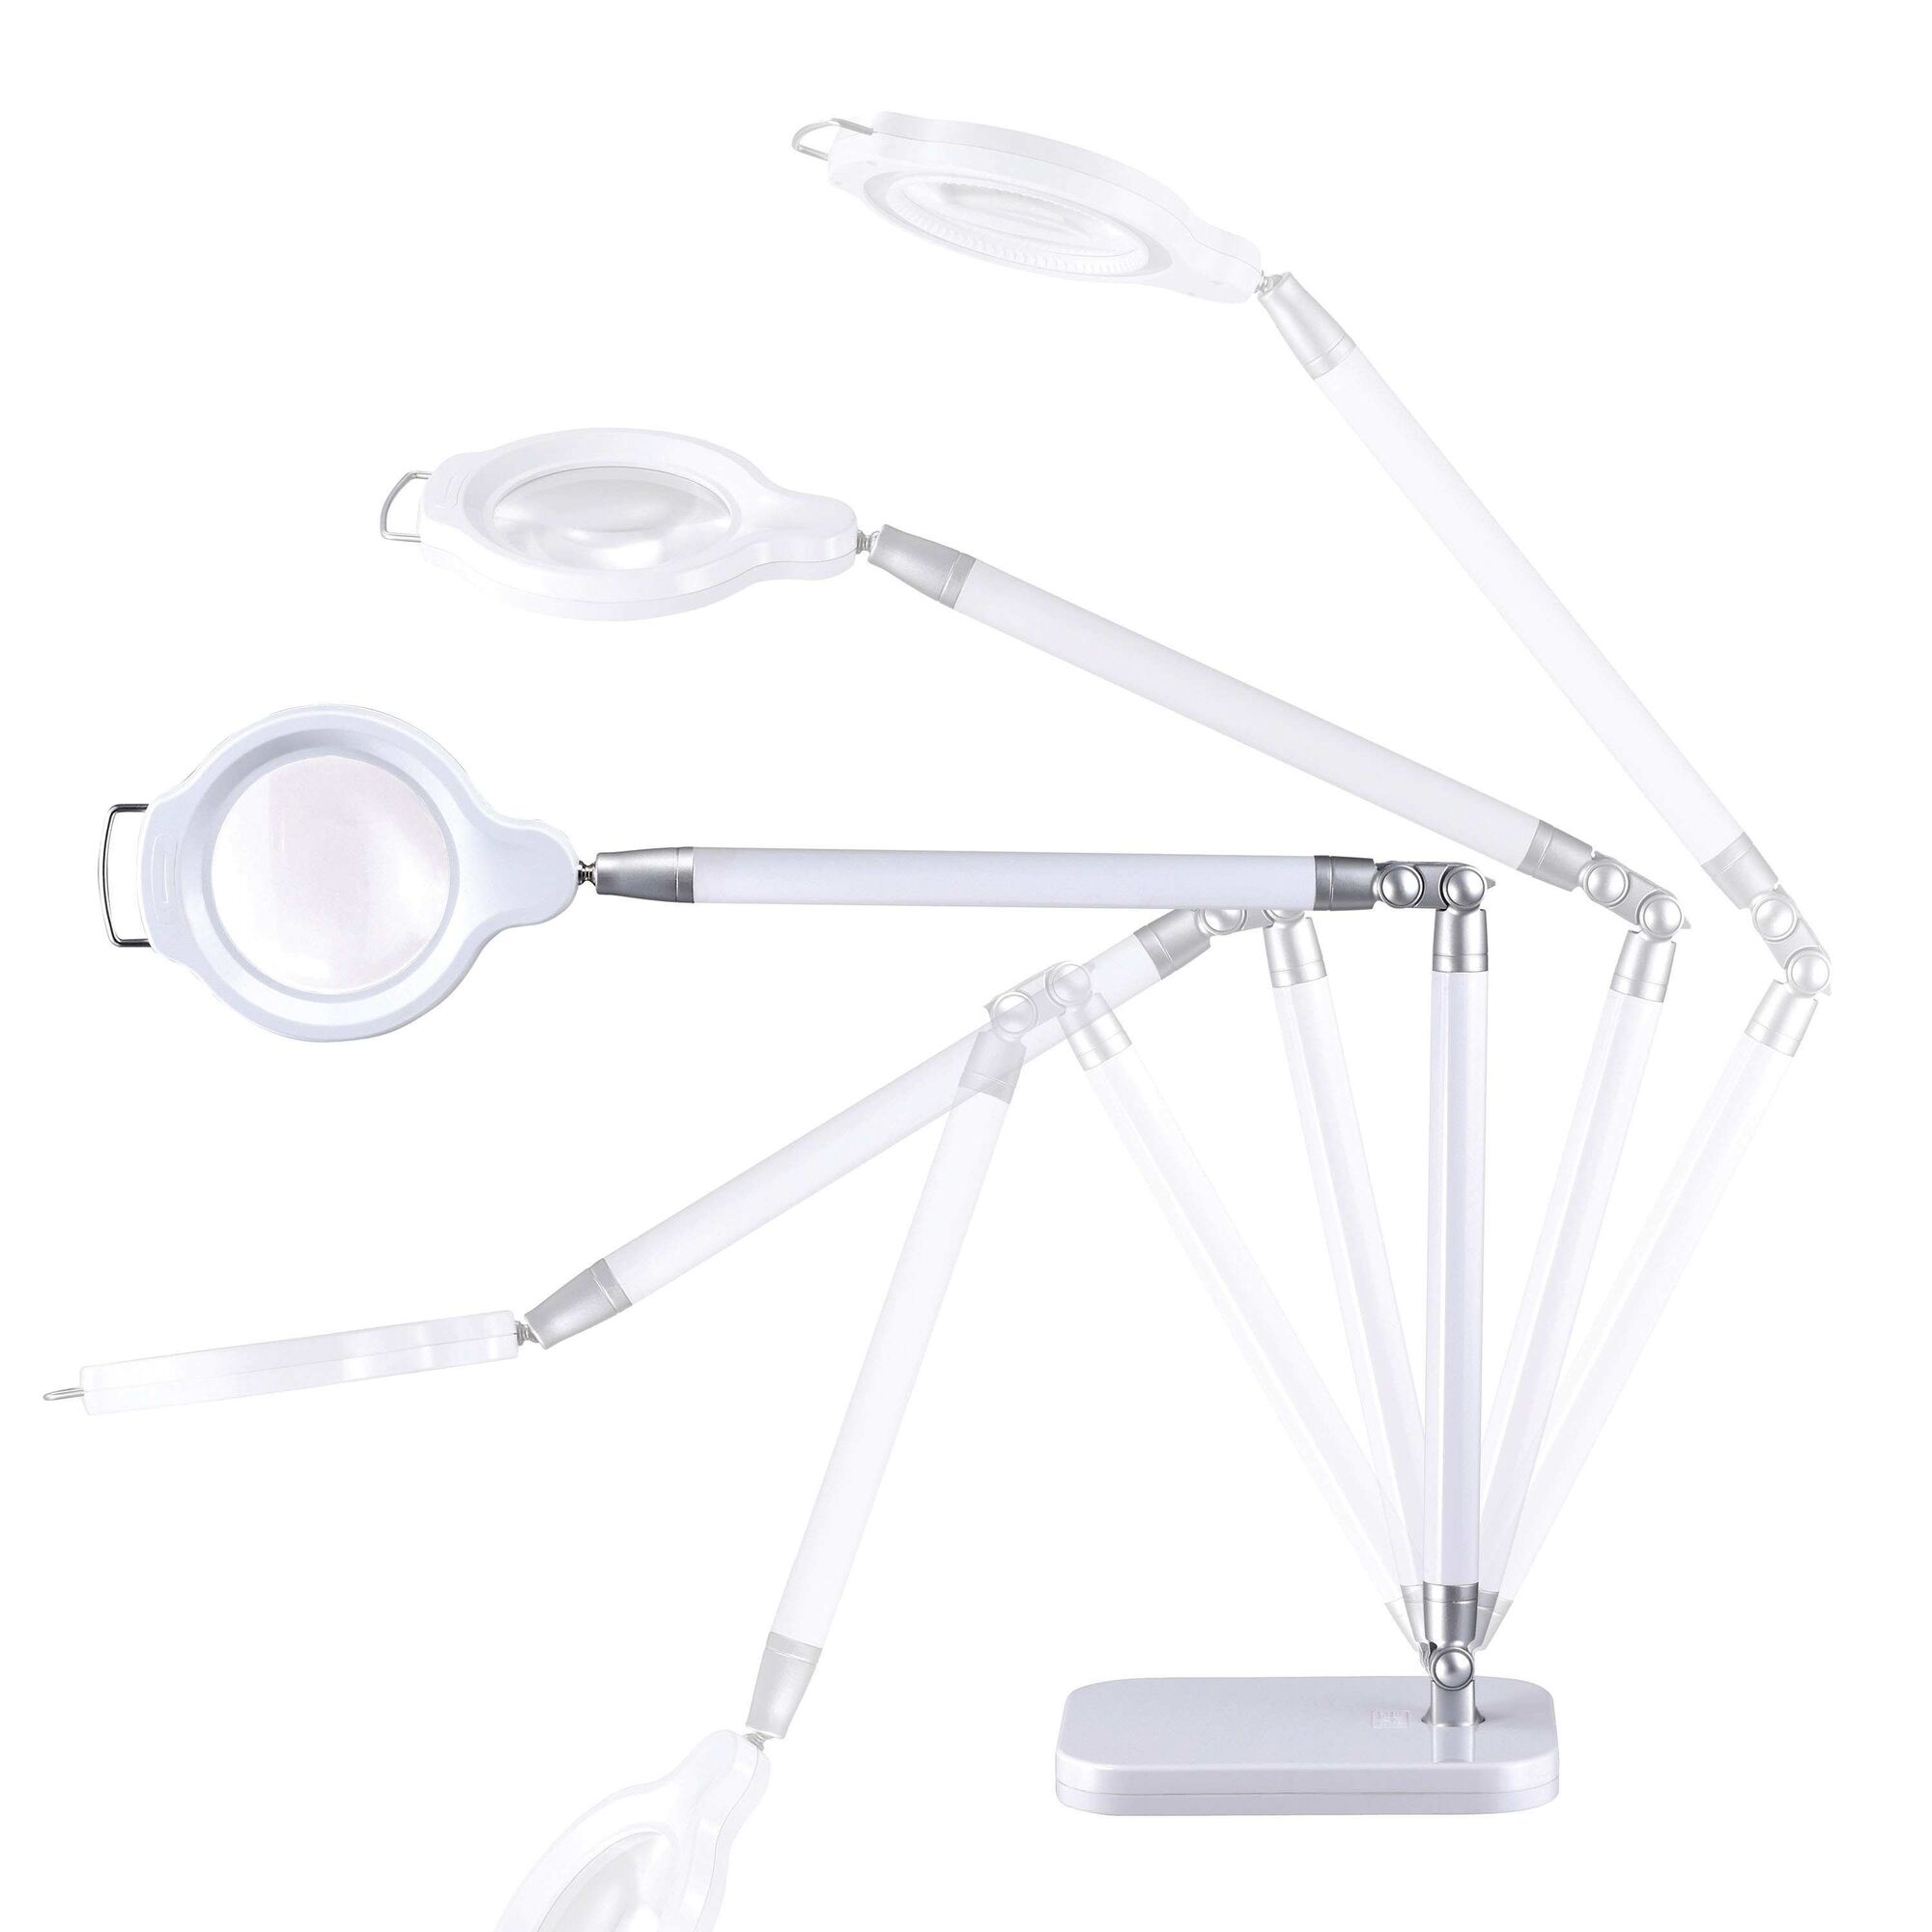 Adjustable stand feature of an ultra reach magnifier led desk lamp.